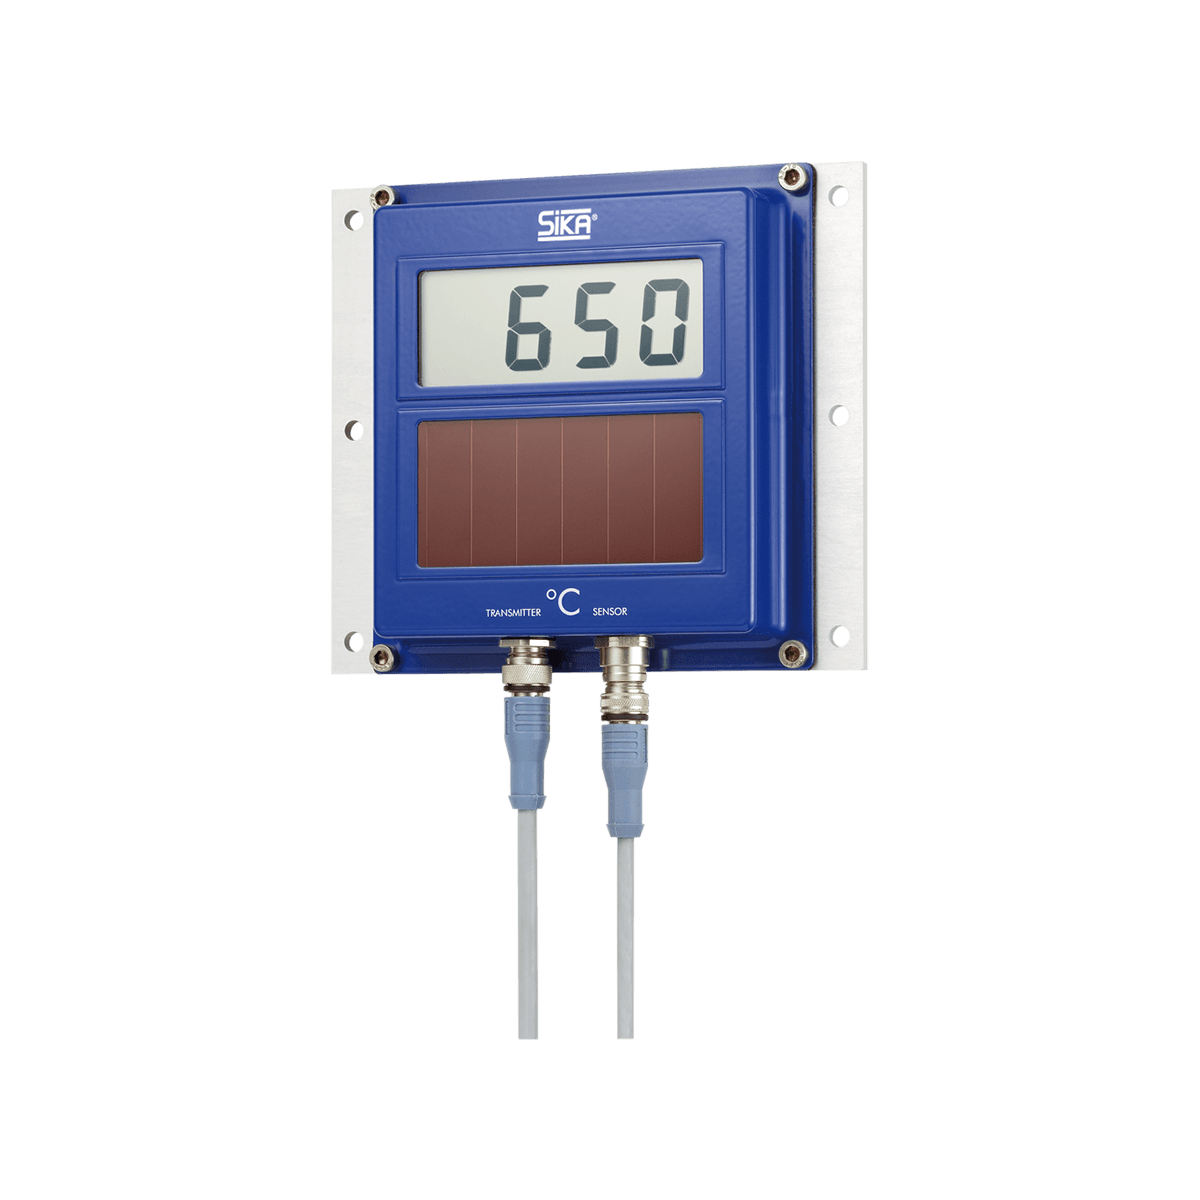 Digital thermometer » Industry and shipbuilding